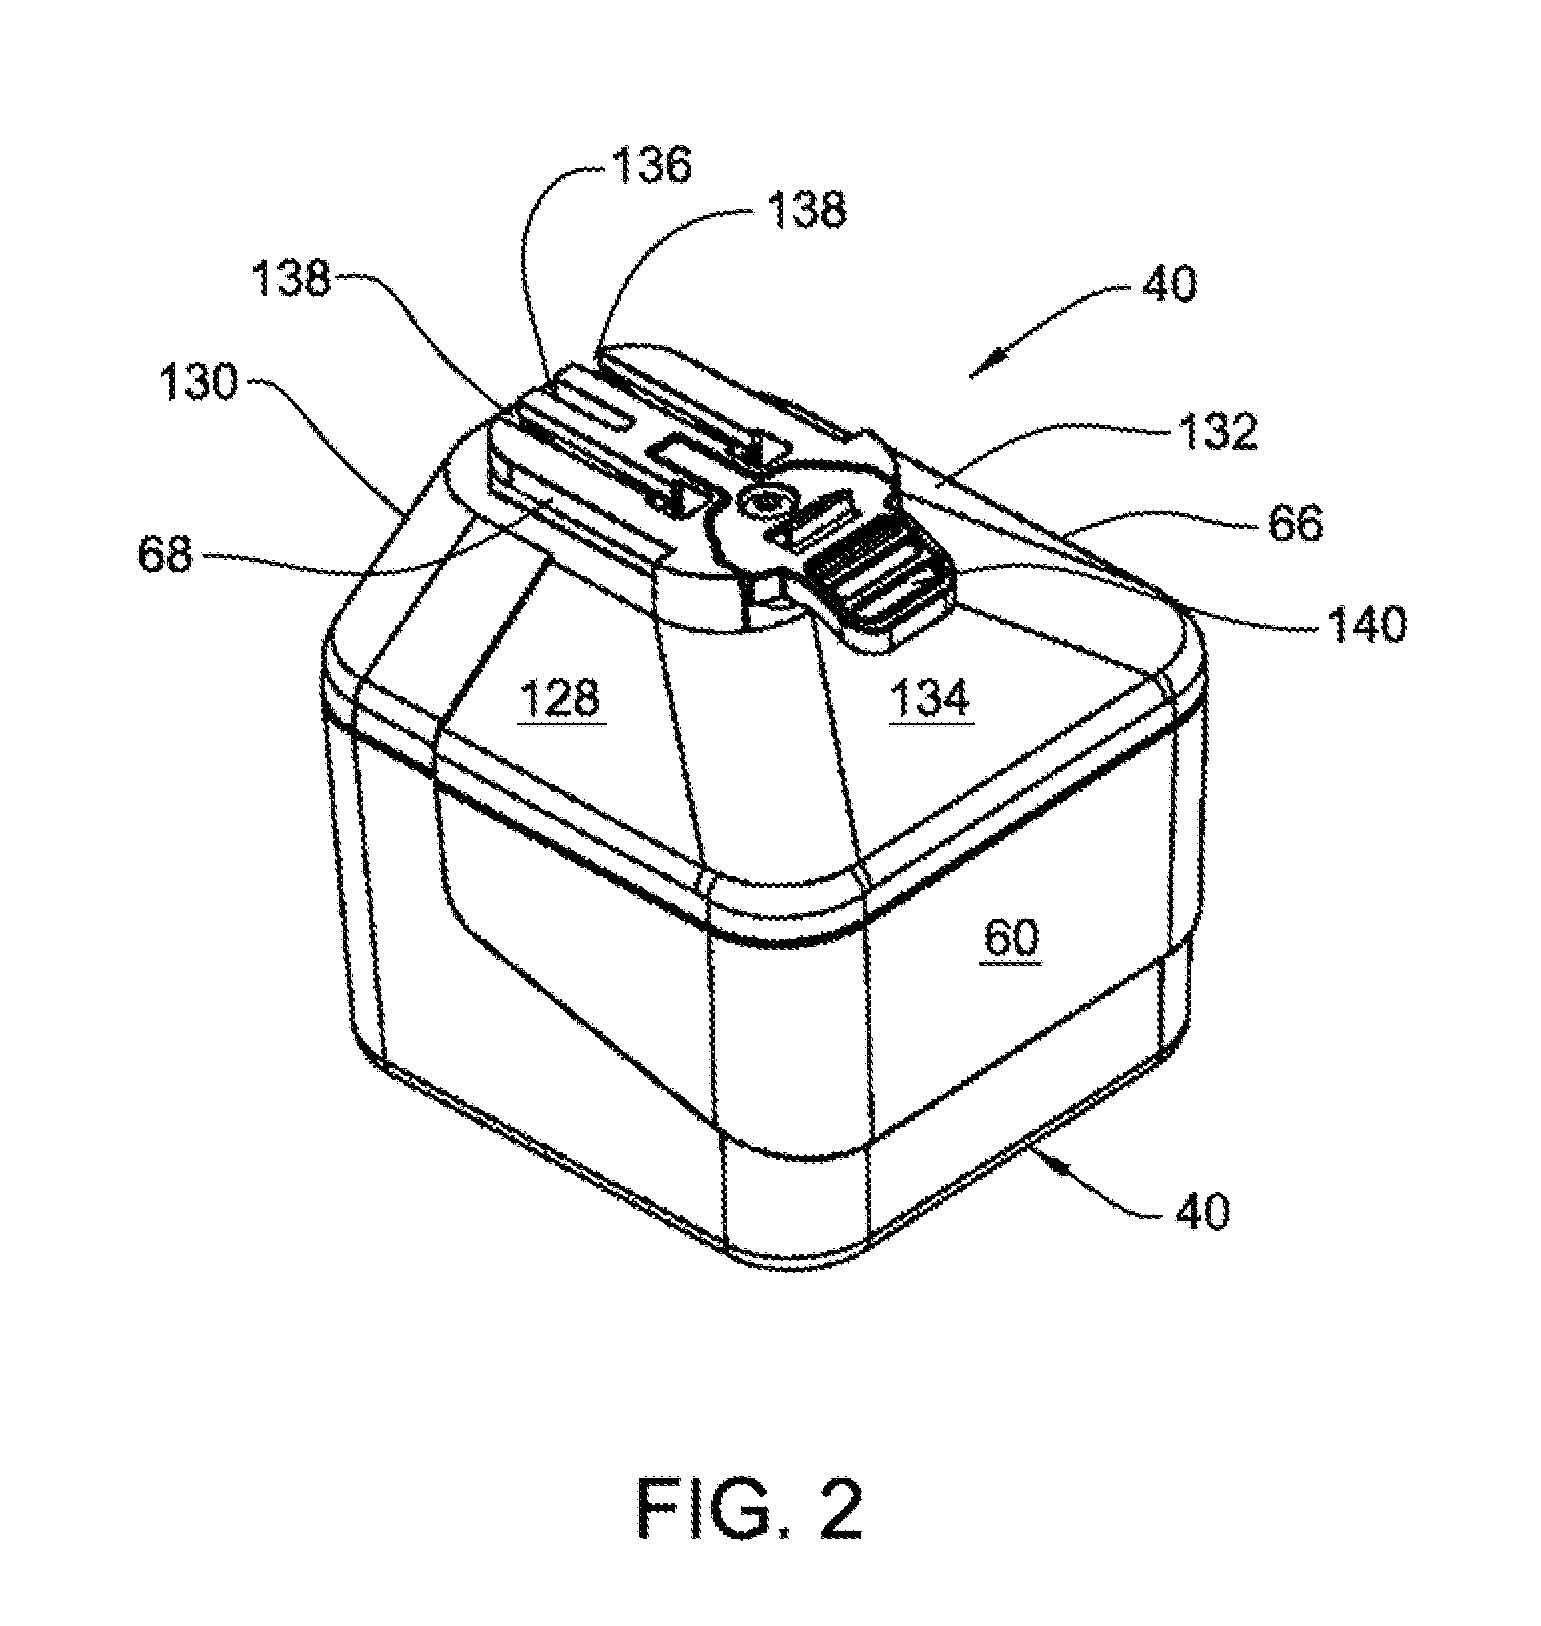 BATTERY CHARGER CAPABLE OF SELECTIVELY PERFORMING A PARTIAL OR FULL STATE-Of-HEALTH EVALUATION ON A BATTERY BASED ON THE HISTOR OF THE BATTERY